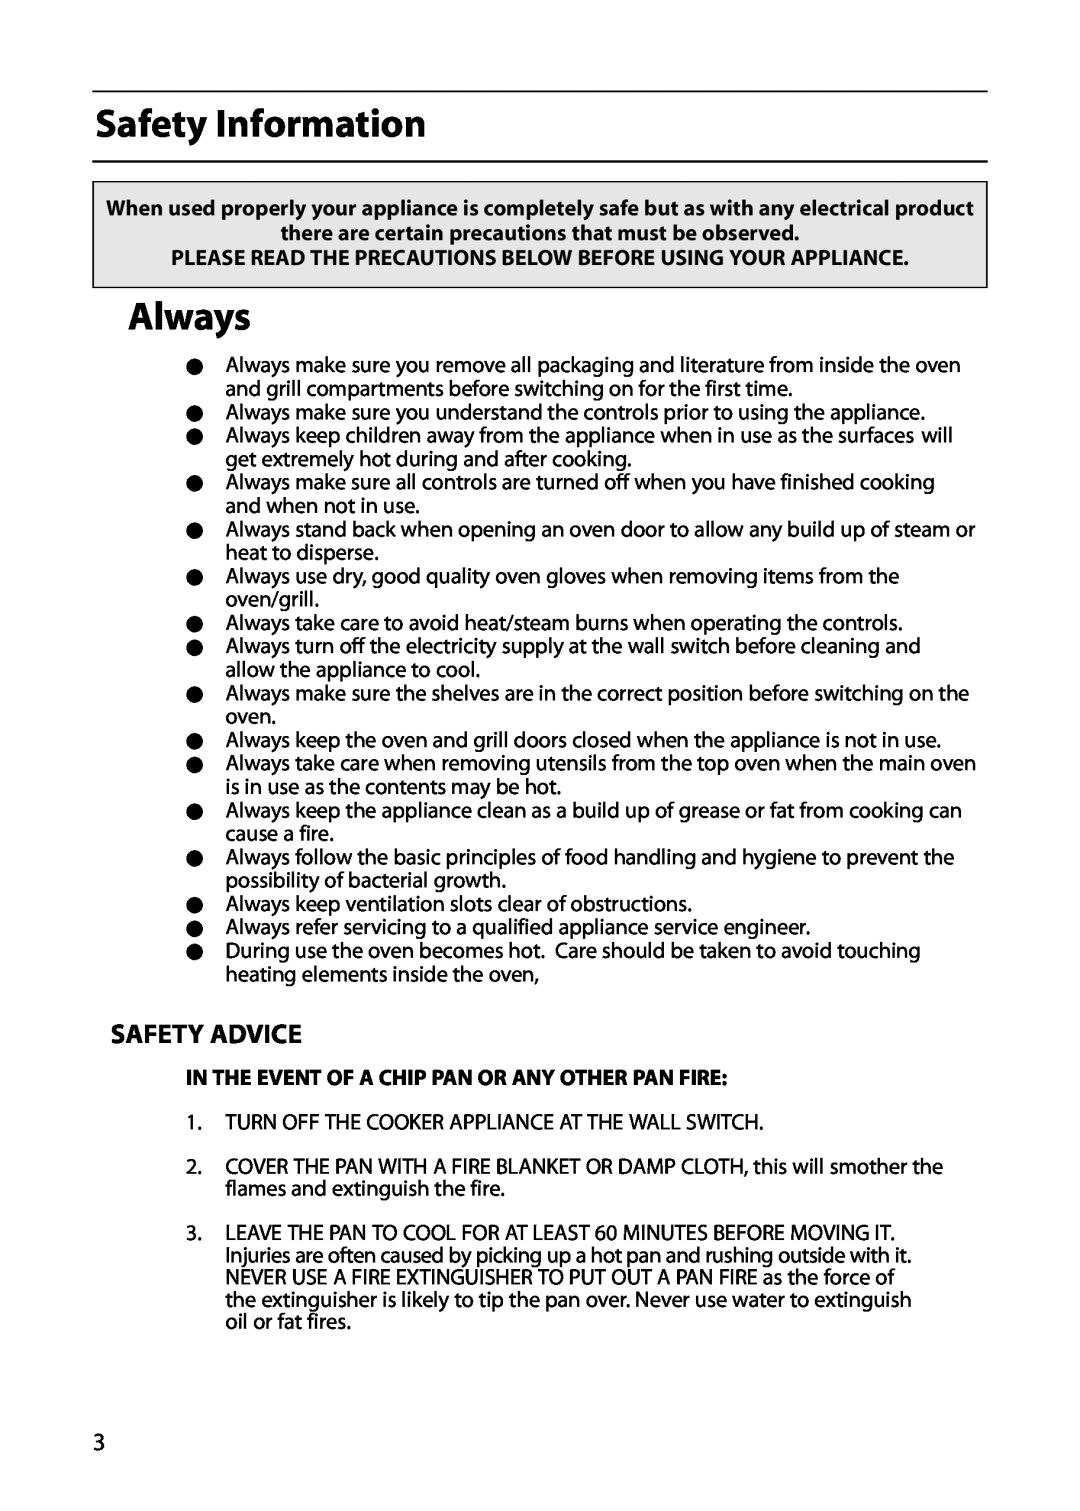 Hotpoint S420E manual Safety Information, Always, Safety Advice 